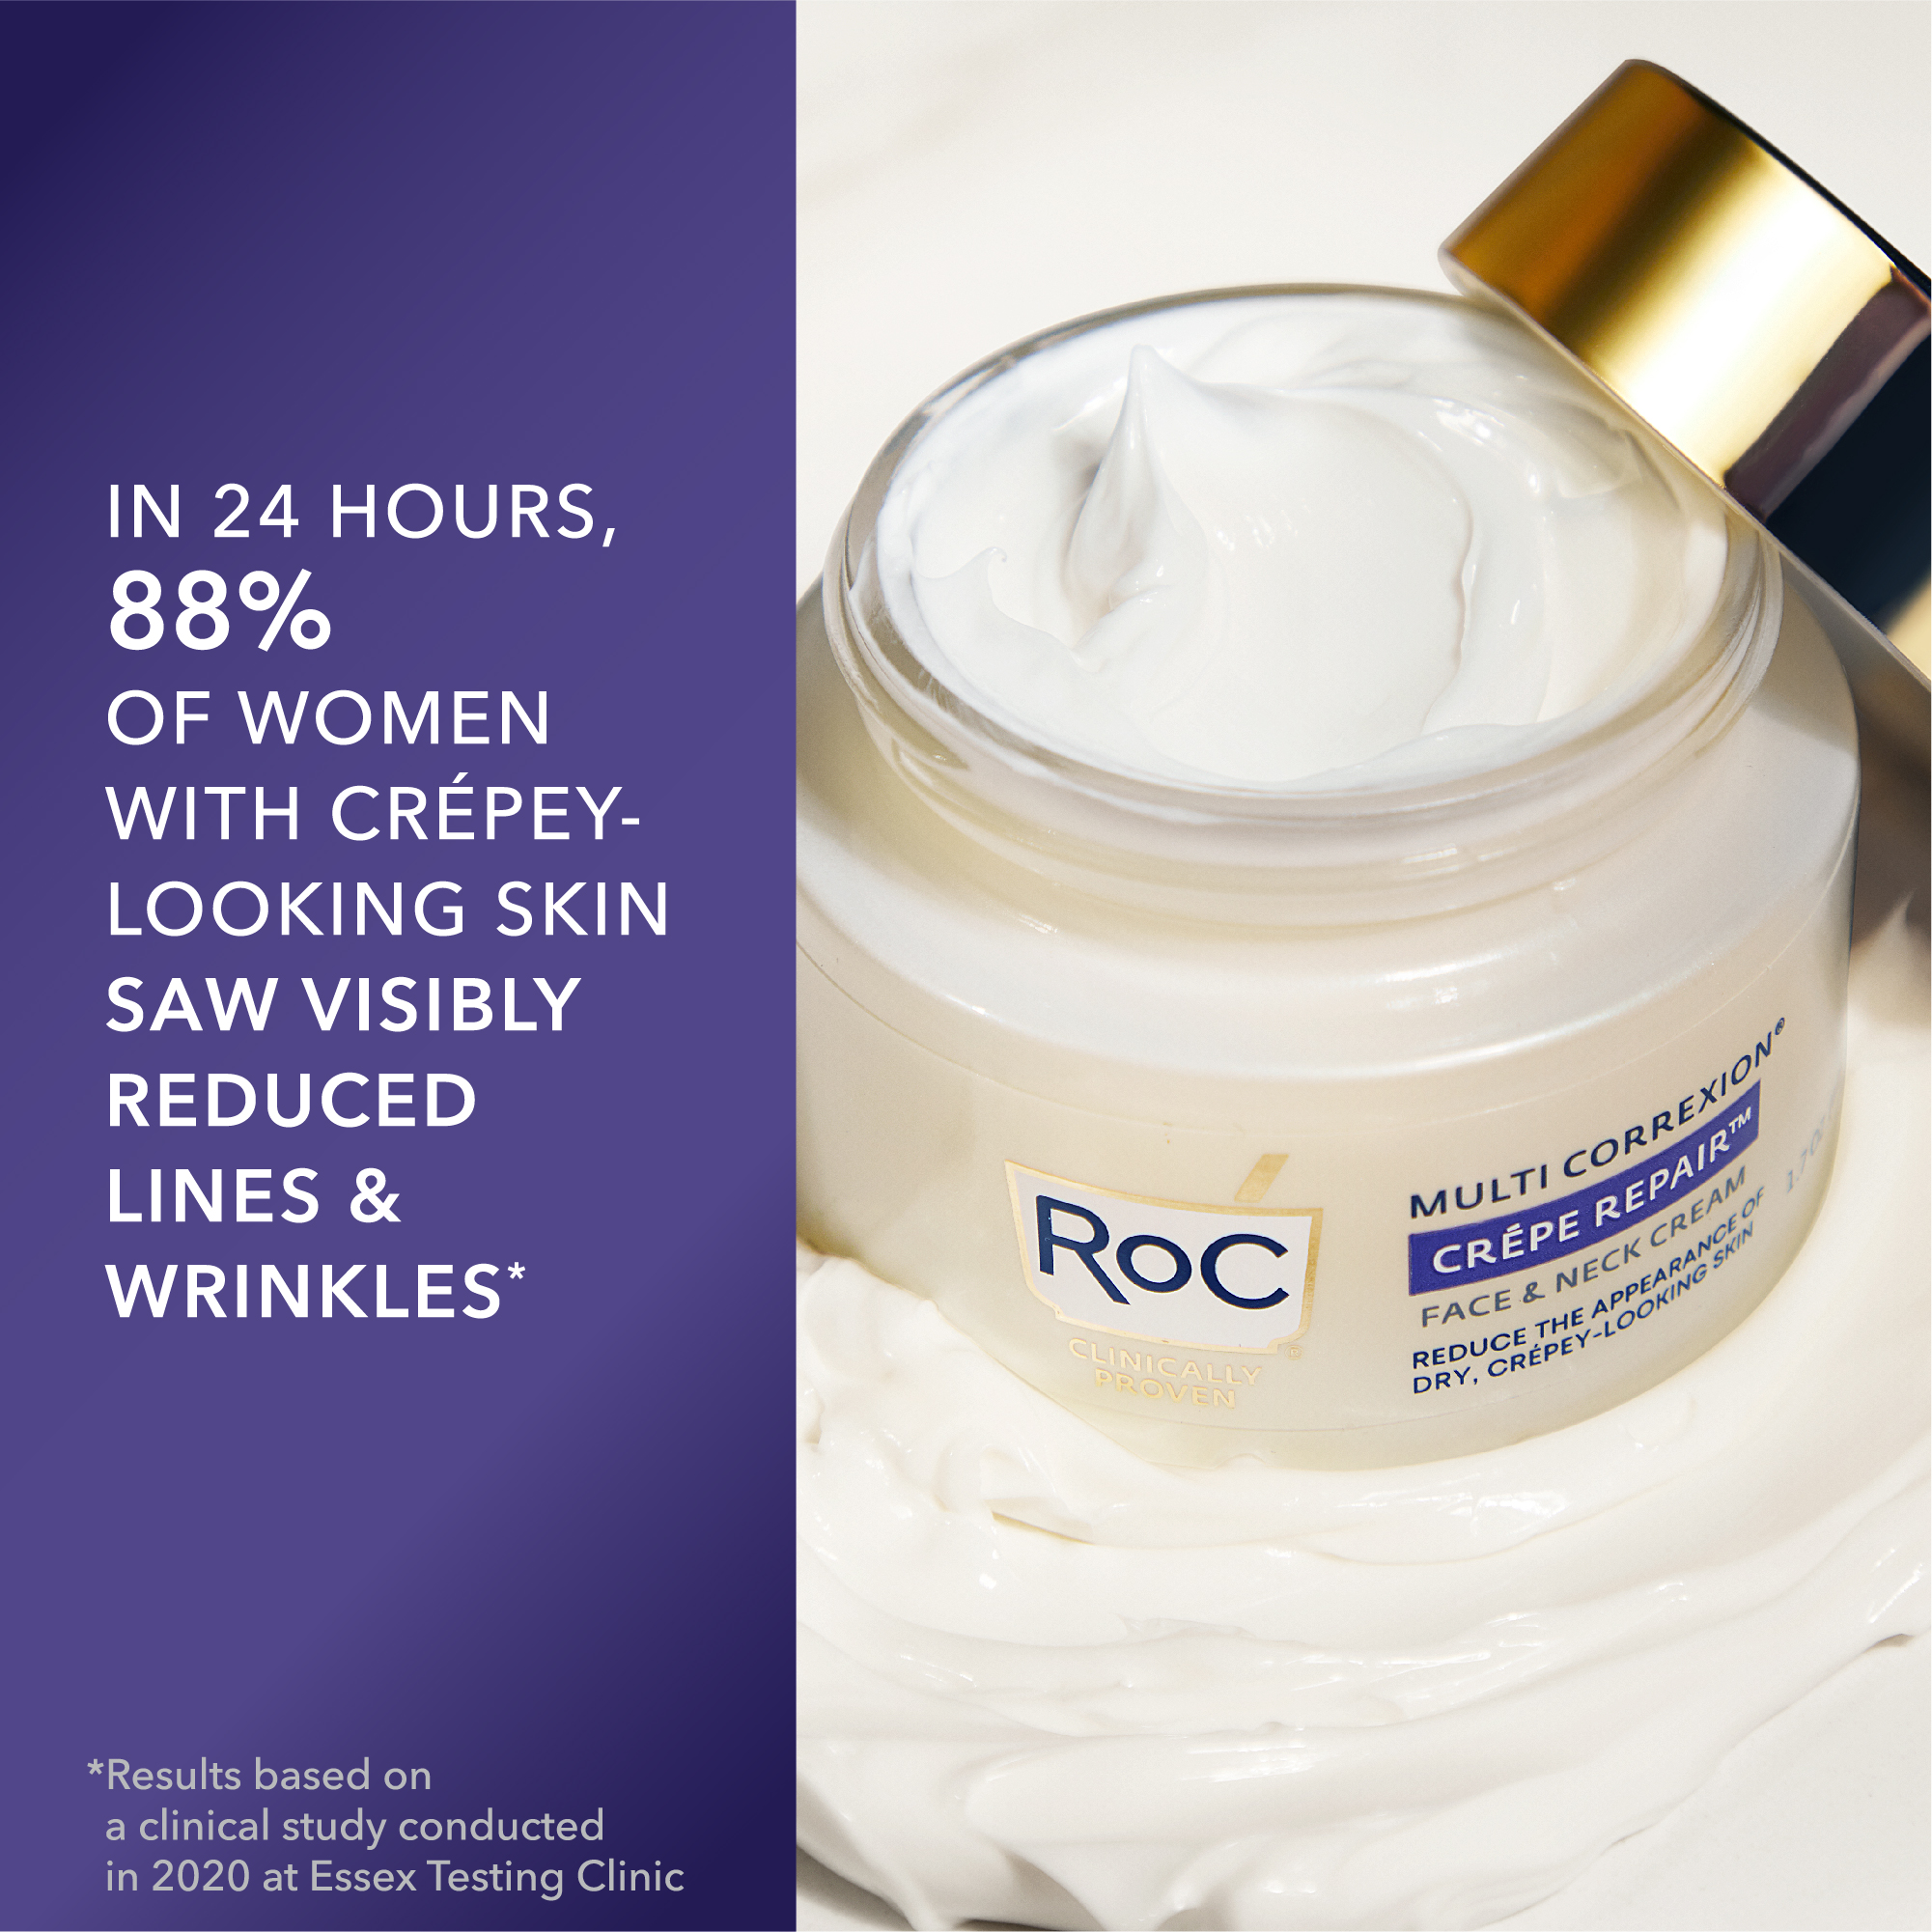 Roc Multi Correxion Anti-Aging Moisturizer, Firming Cream for Dry & Crepey Skin, 1.7 oz - image 3 of 11